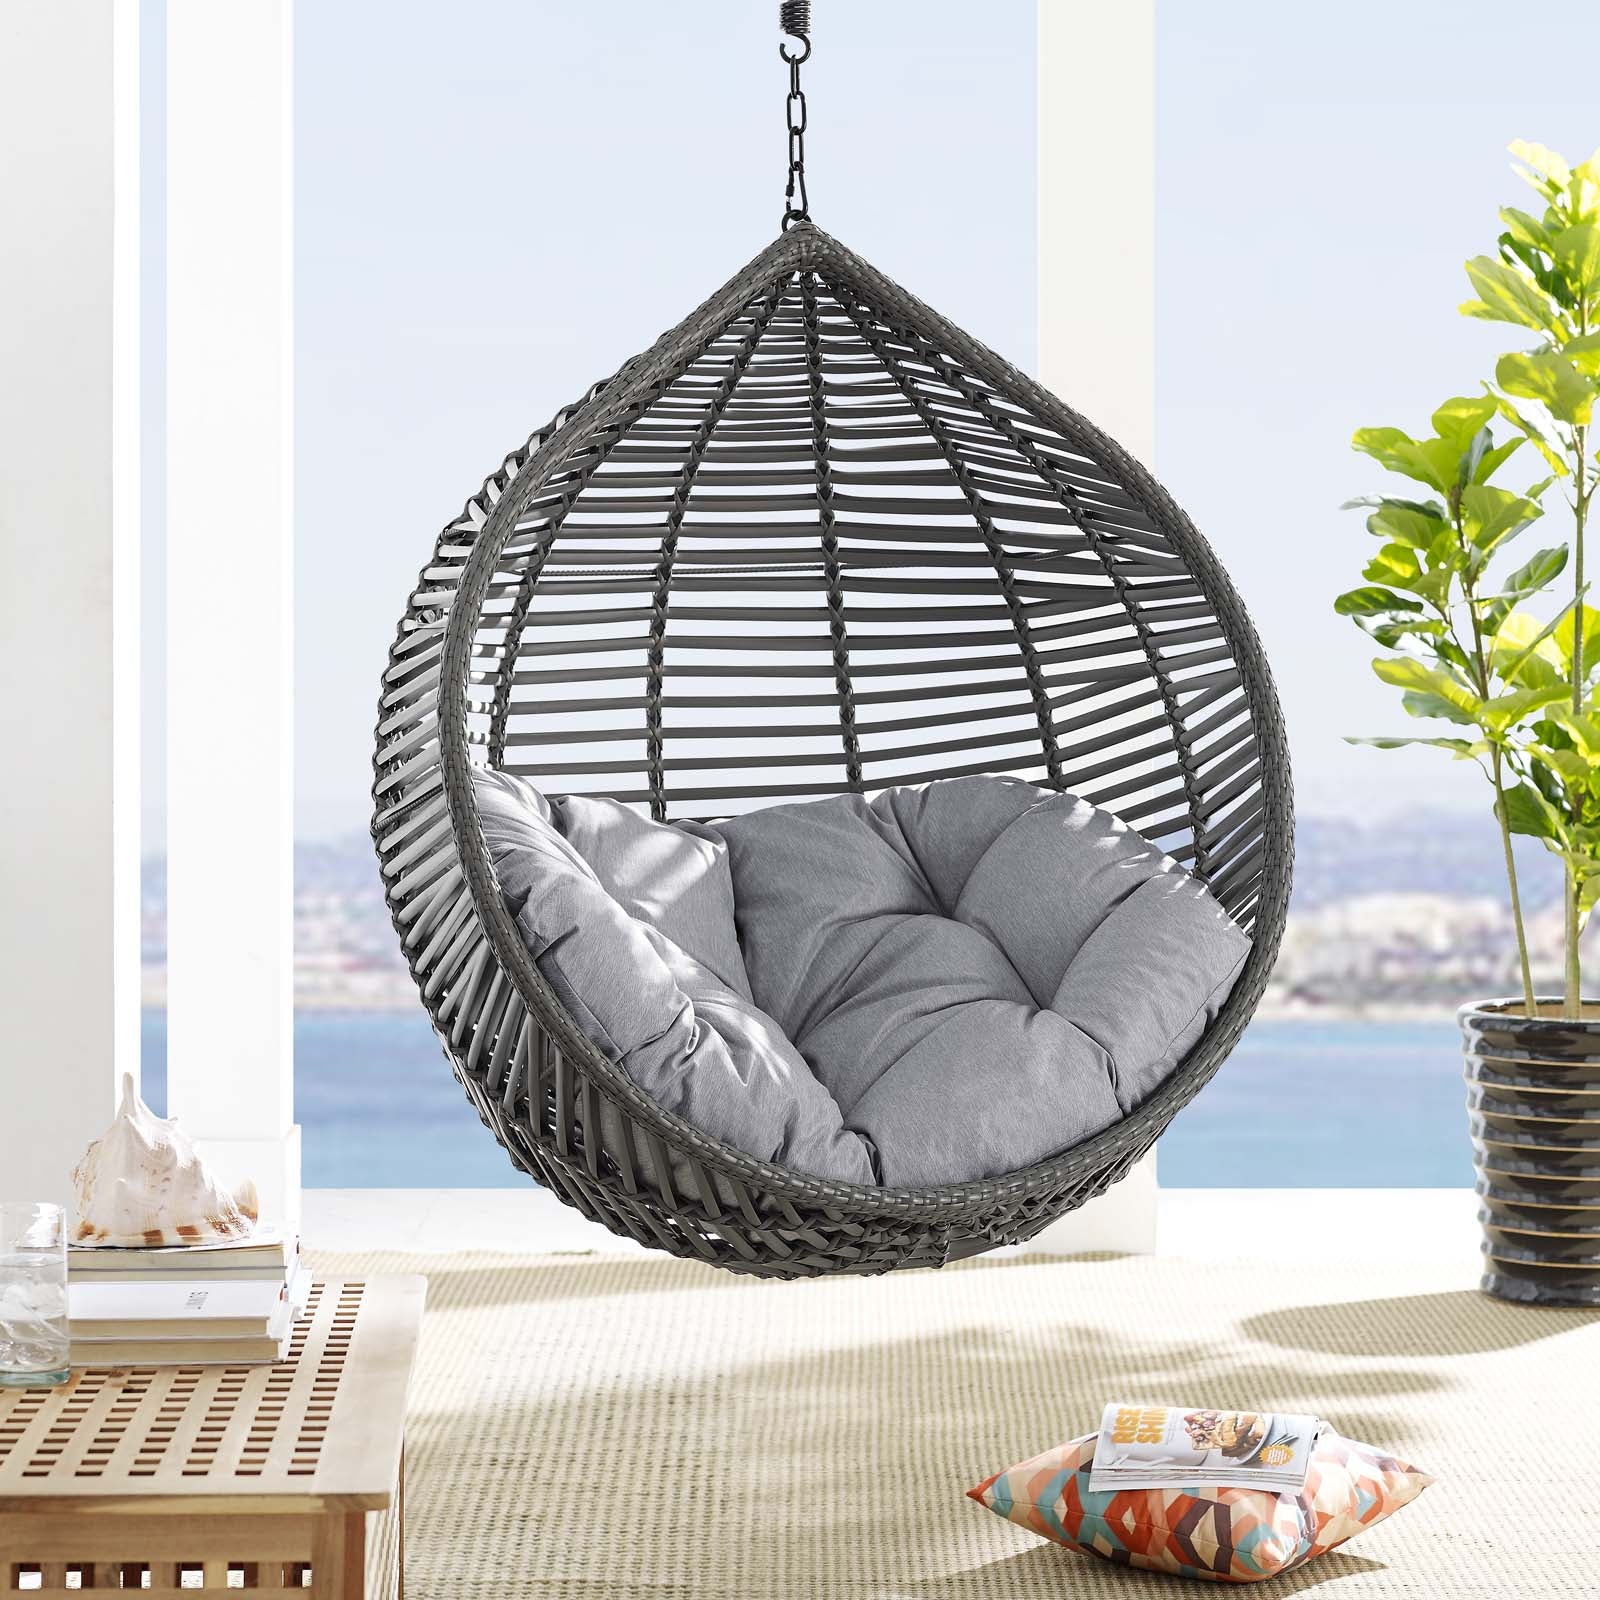 Garner Teardrop Patio Swing Chair Without Stand